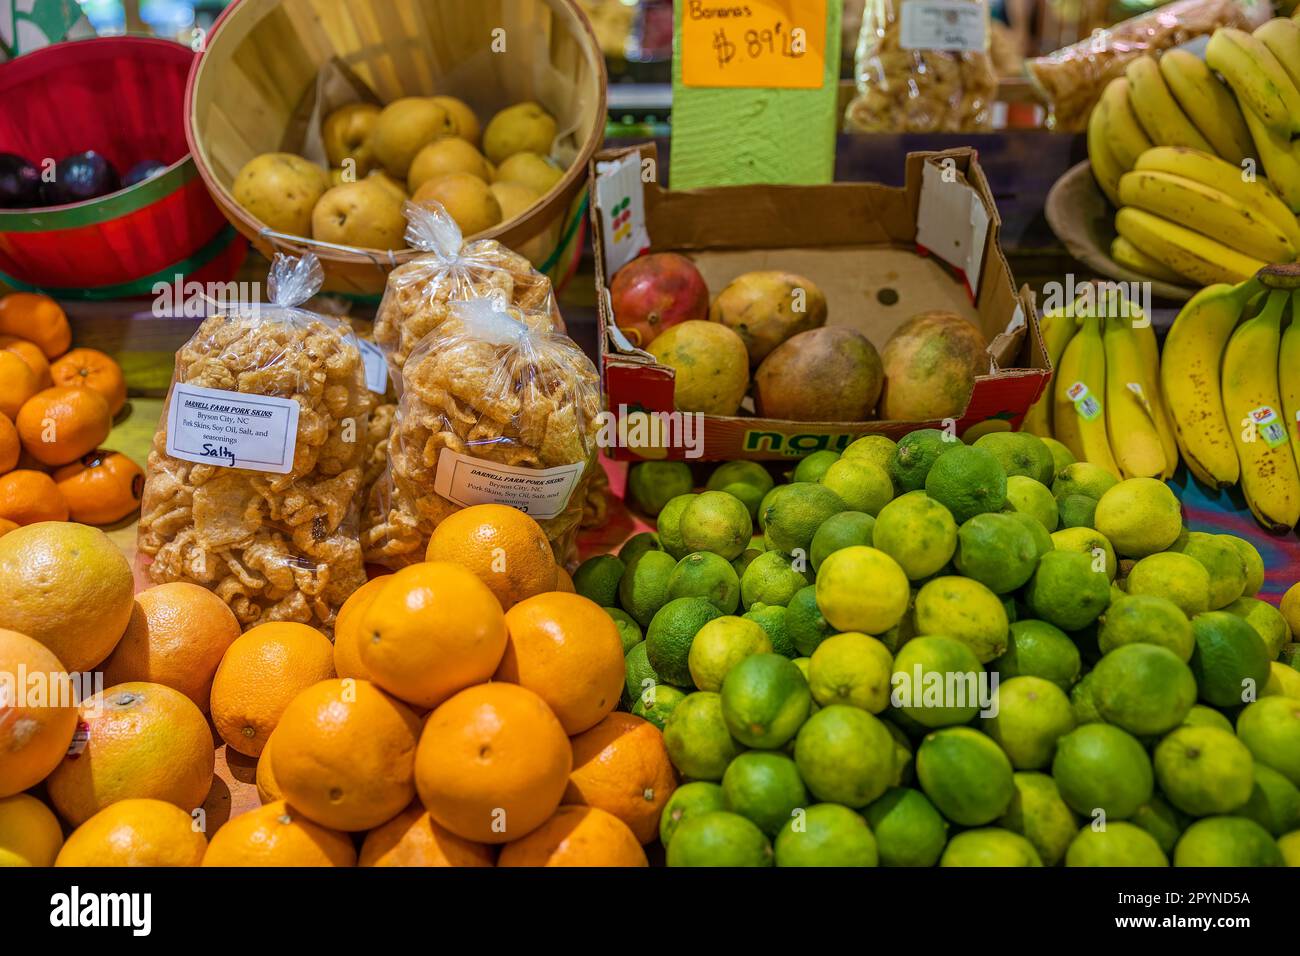 Bryson, North Carolina, USA - April 19, 2023: Darnell Farms open air market with tables of fruit and  bags of pork skins for sale. Stock Photo